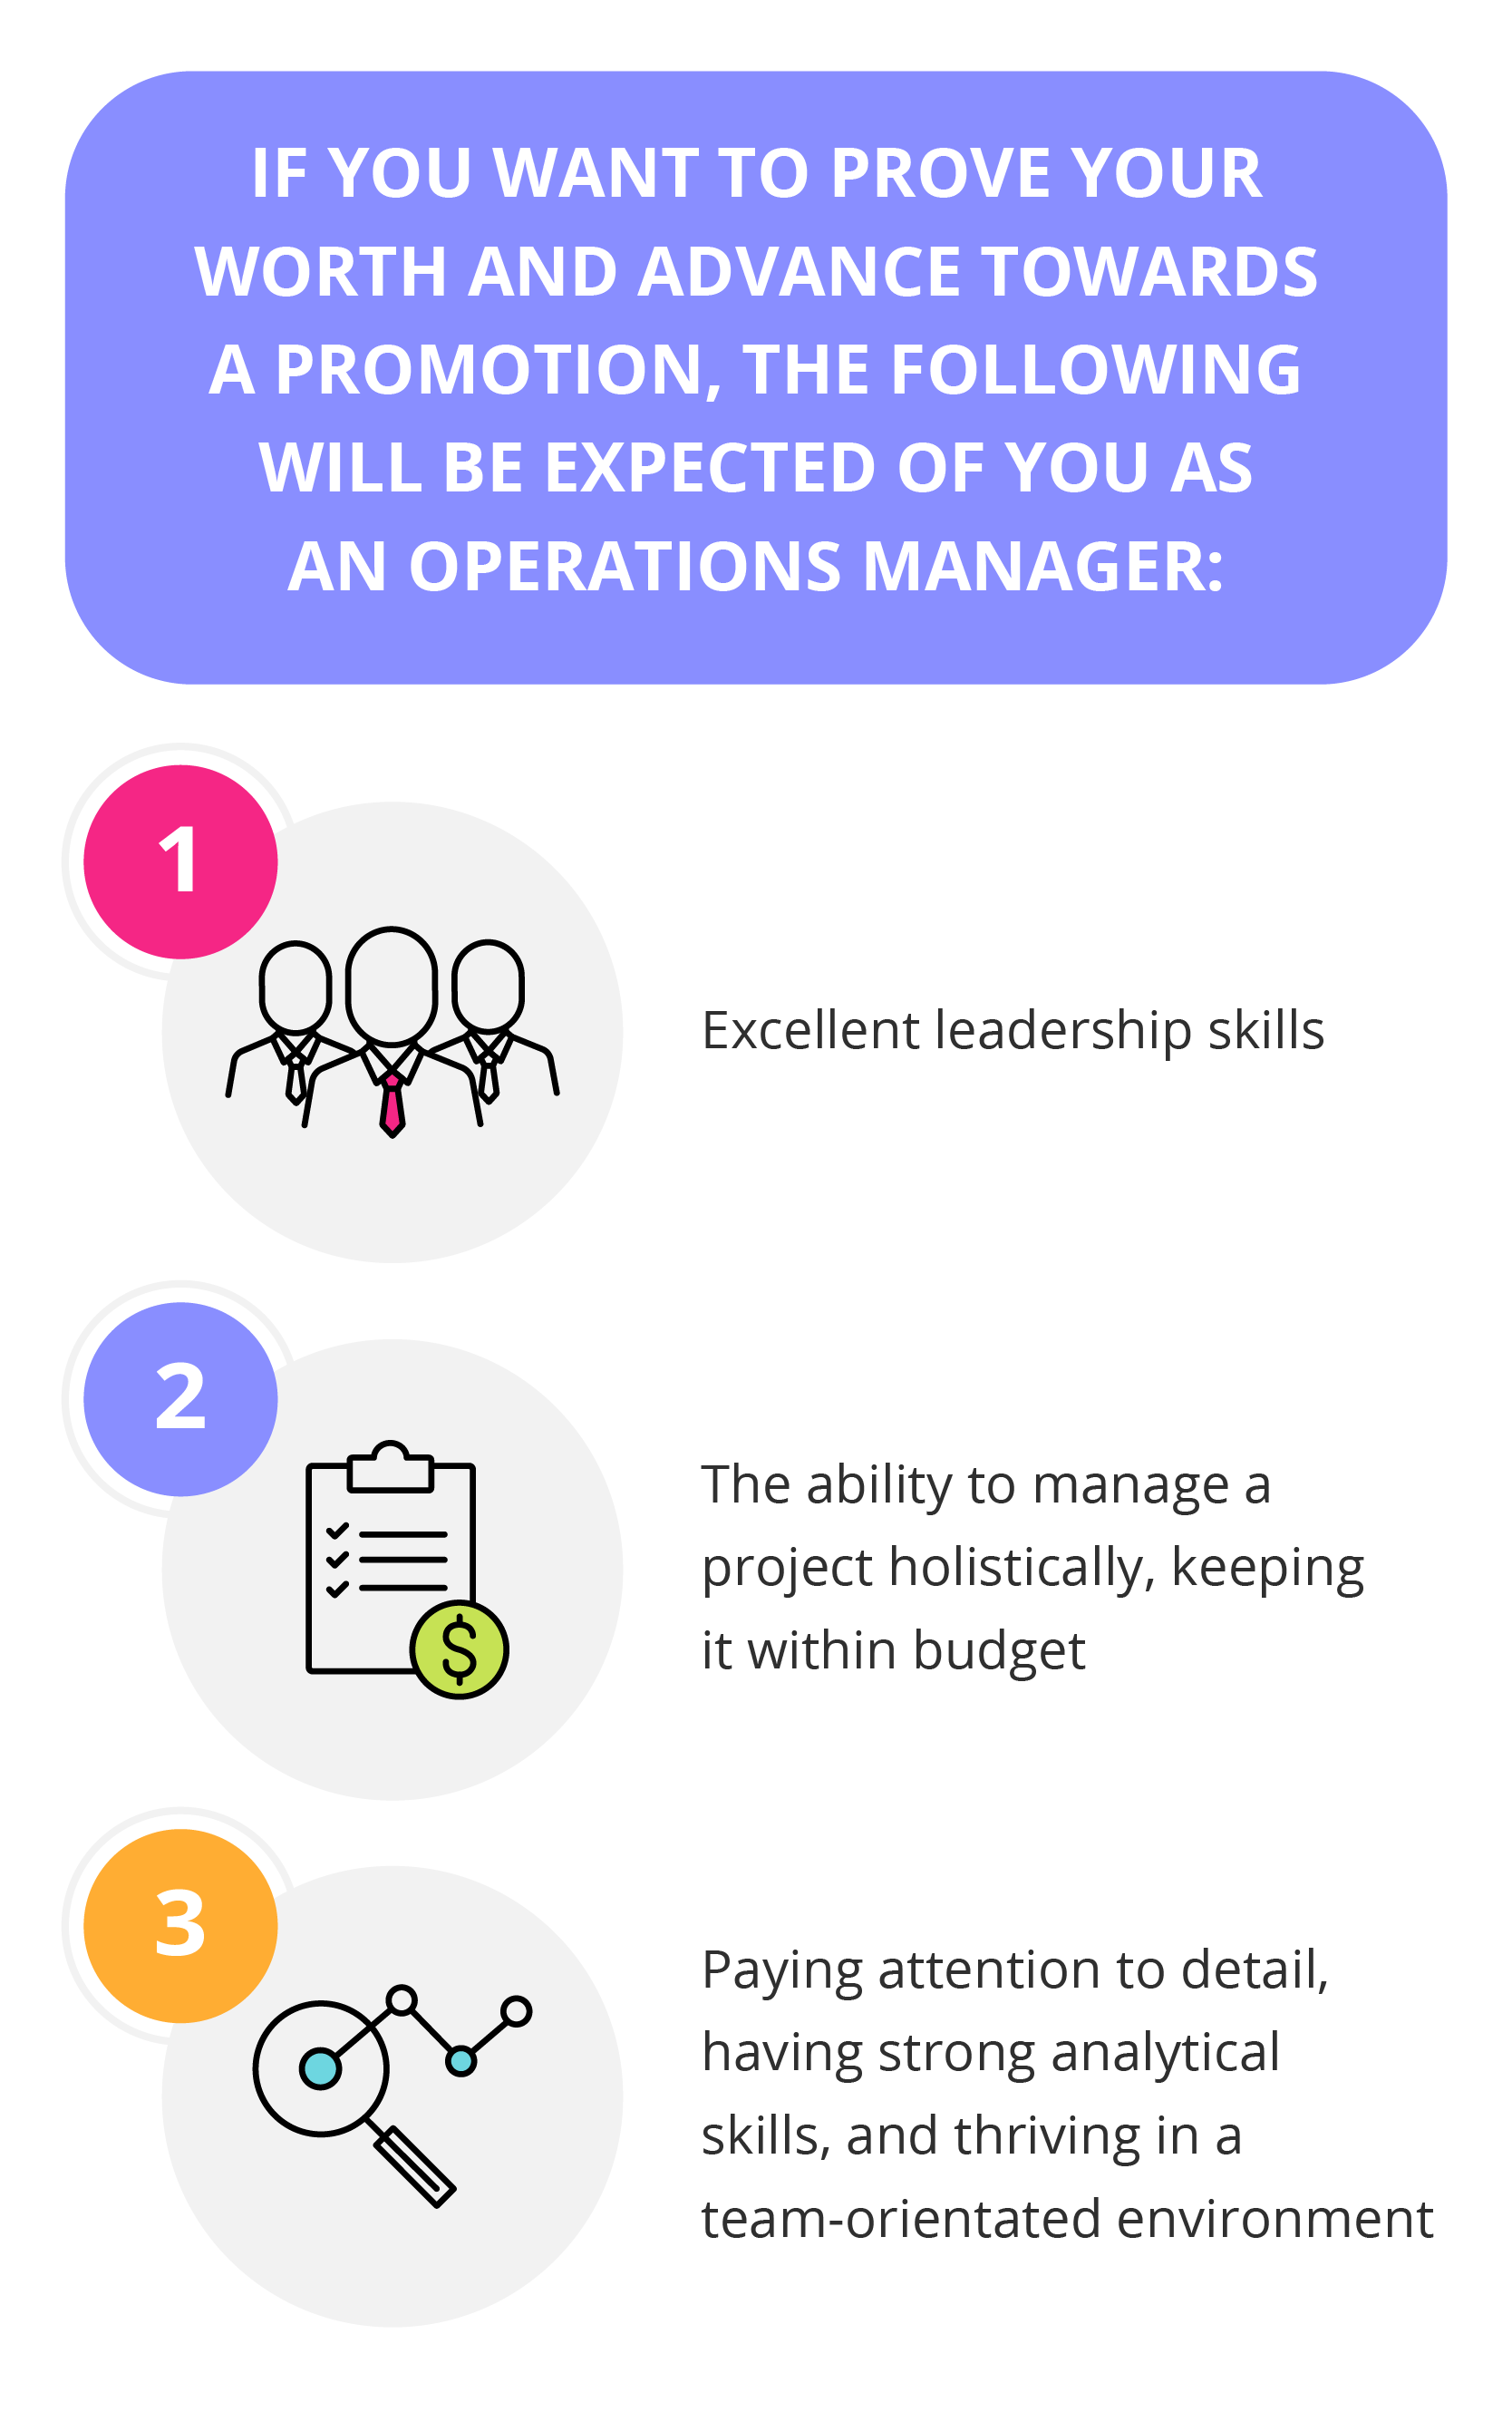 How to Become an Operations Manager - Career Advice